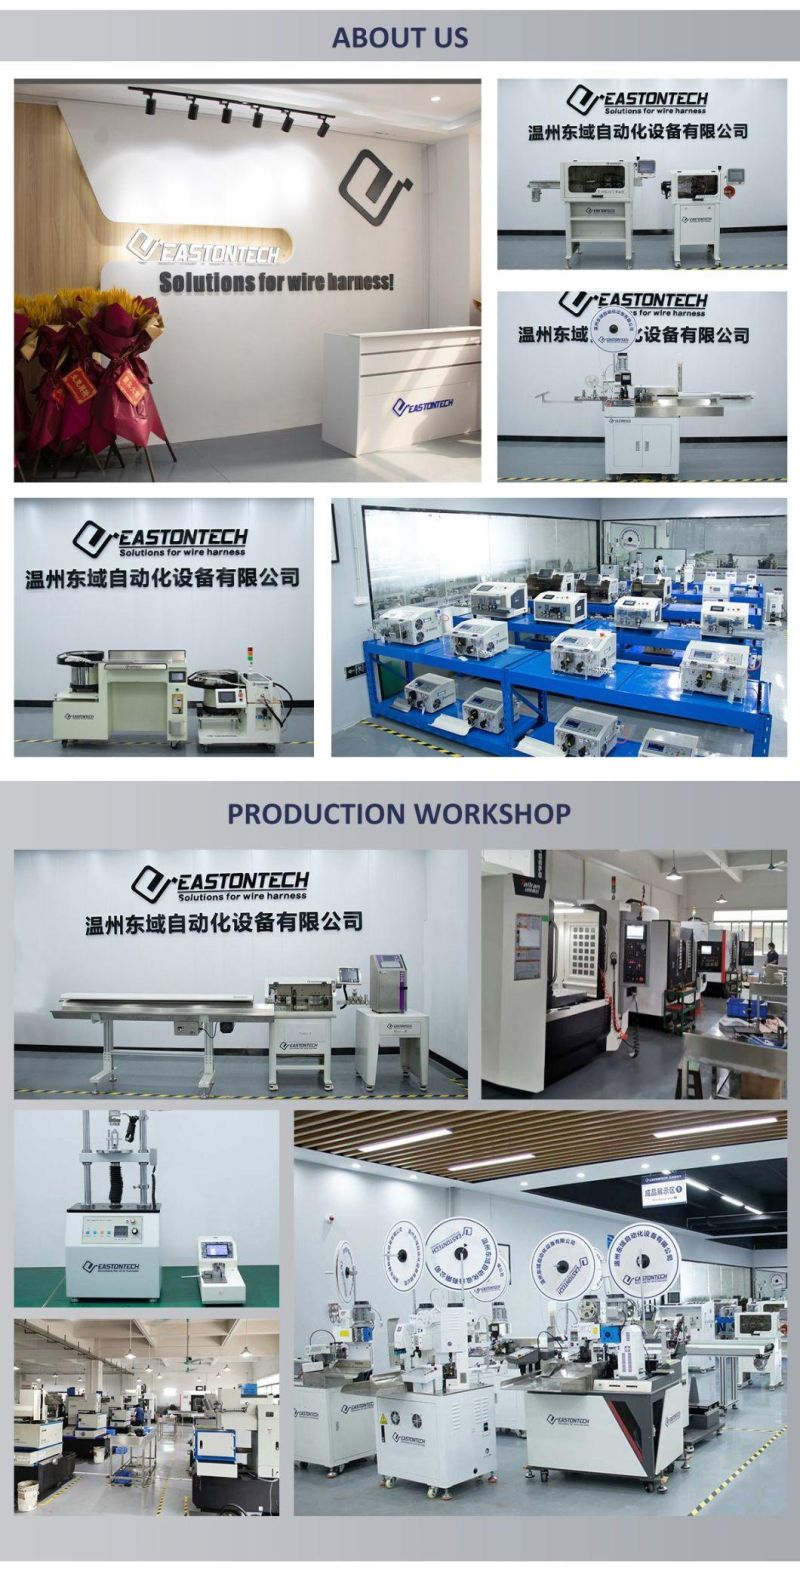 Eastontech Ew-02b High Quality Wire Stripping Machine Automatic Wire Cutting and Stripping Machine Bilingual